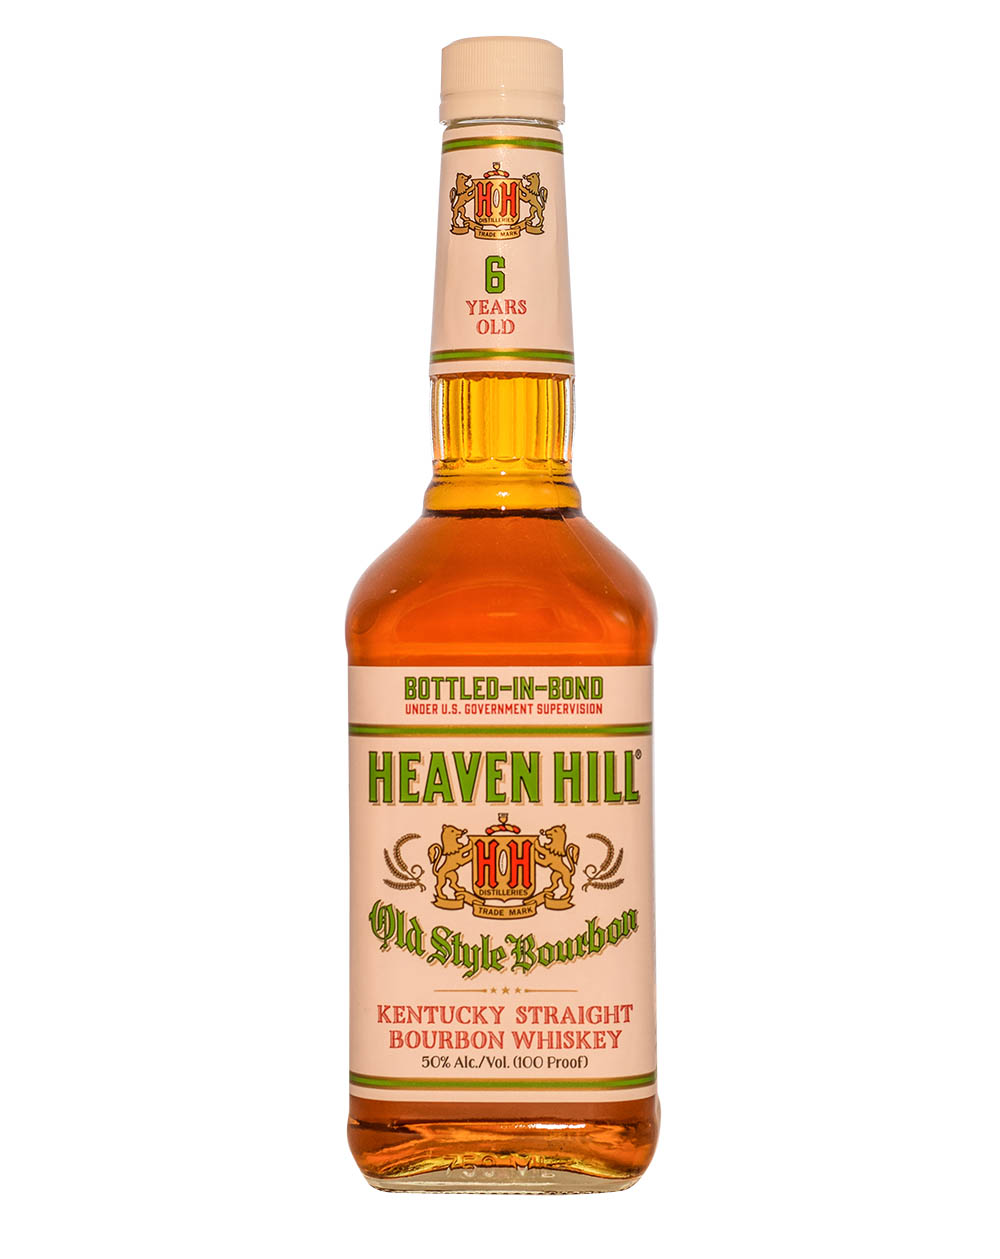 Heaven Hill Bottled-in-Bond (6 Years Old) Musthave Malts MHM